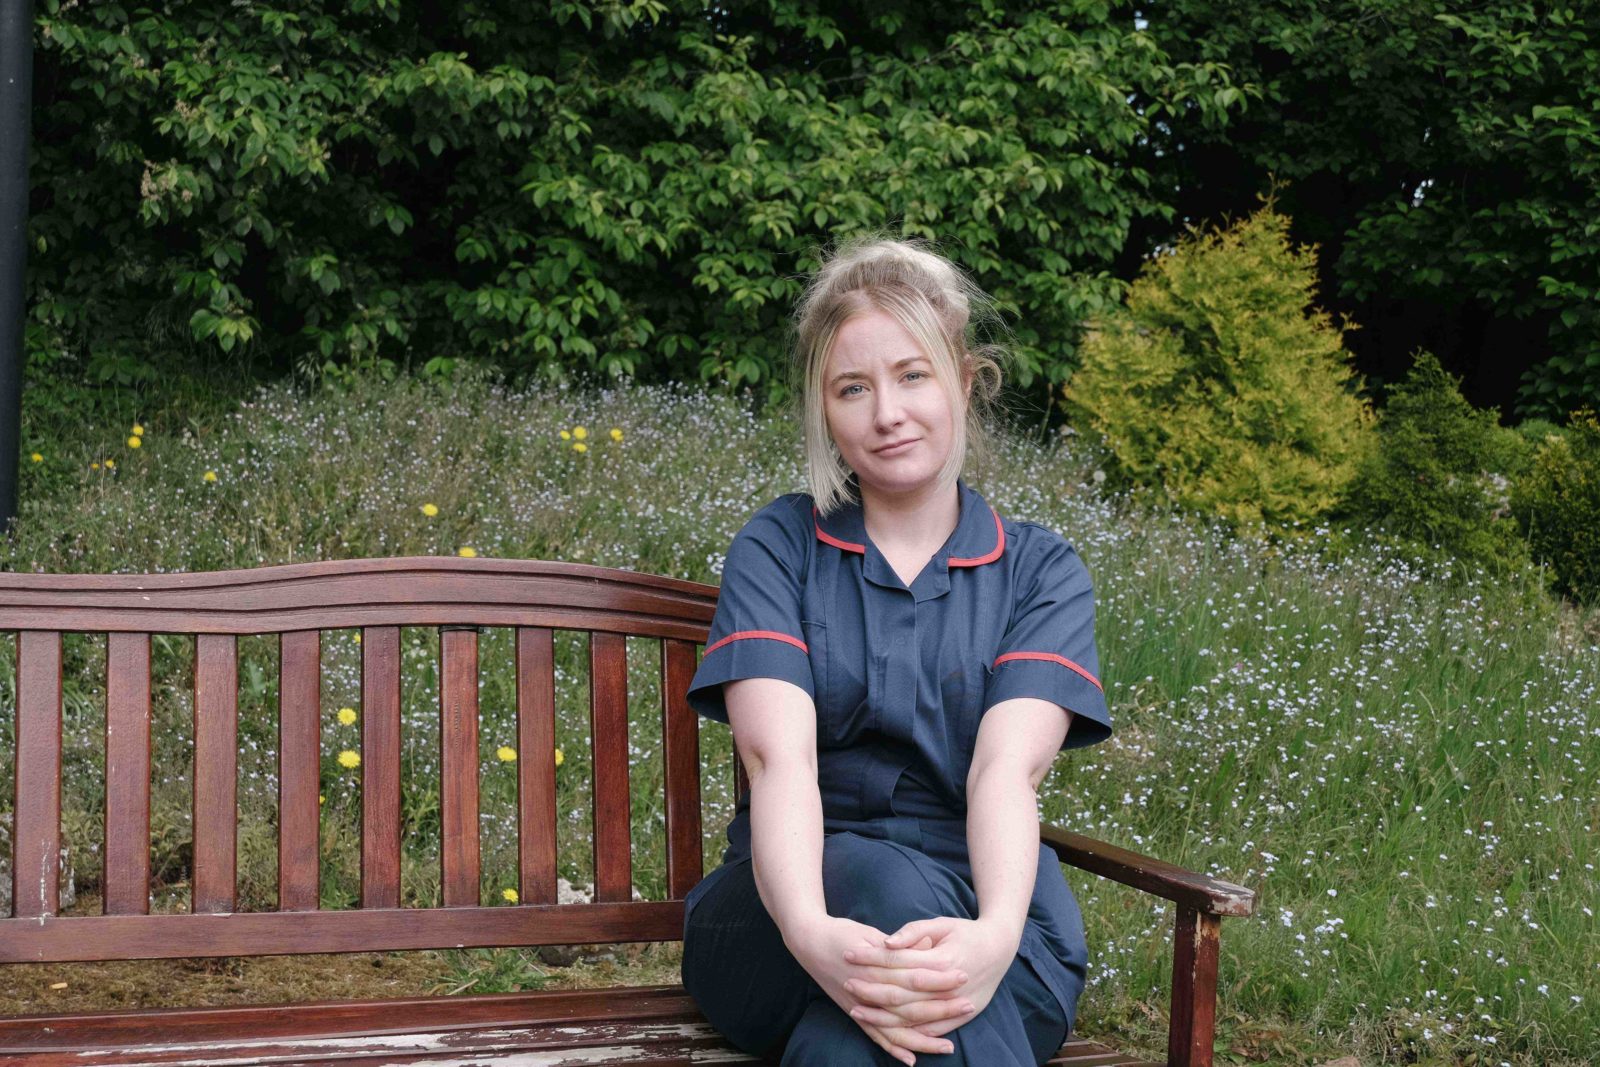 A young blonde woman with her hair tied back half smiles at the camera whilst sat on a wooden park bench, hands clasped around her left knee. She is wearing a nurses or carers uniform.